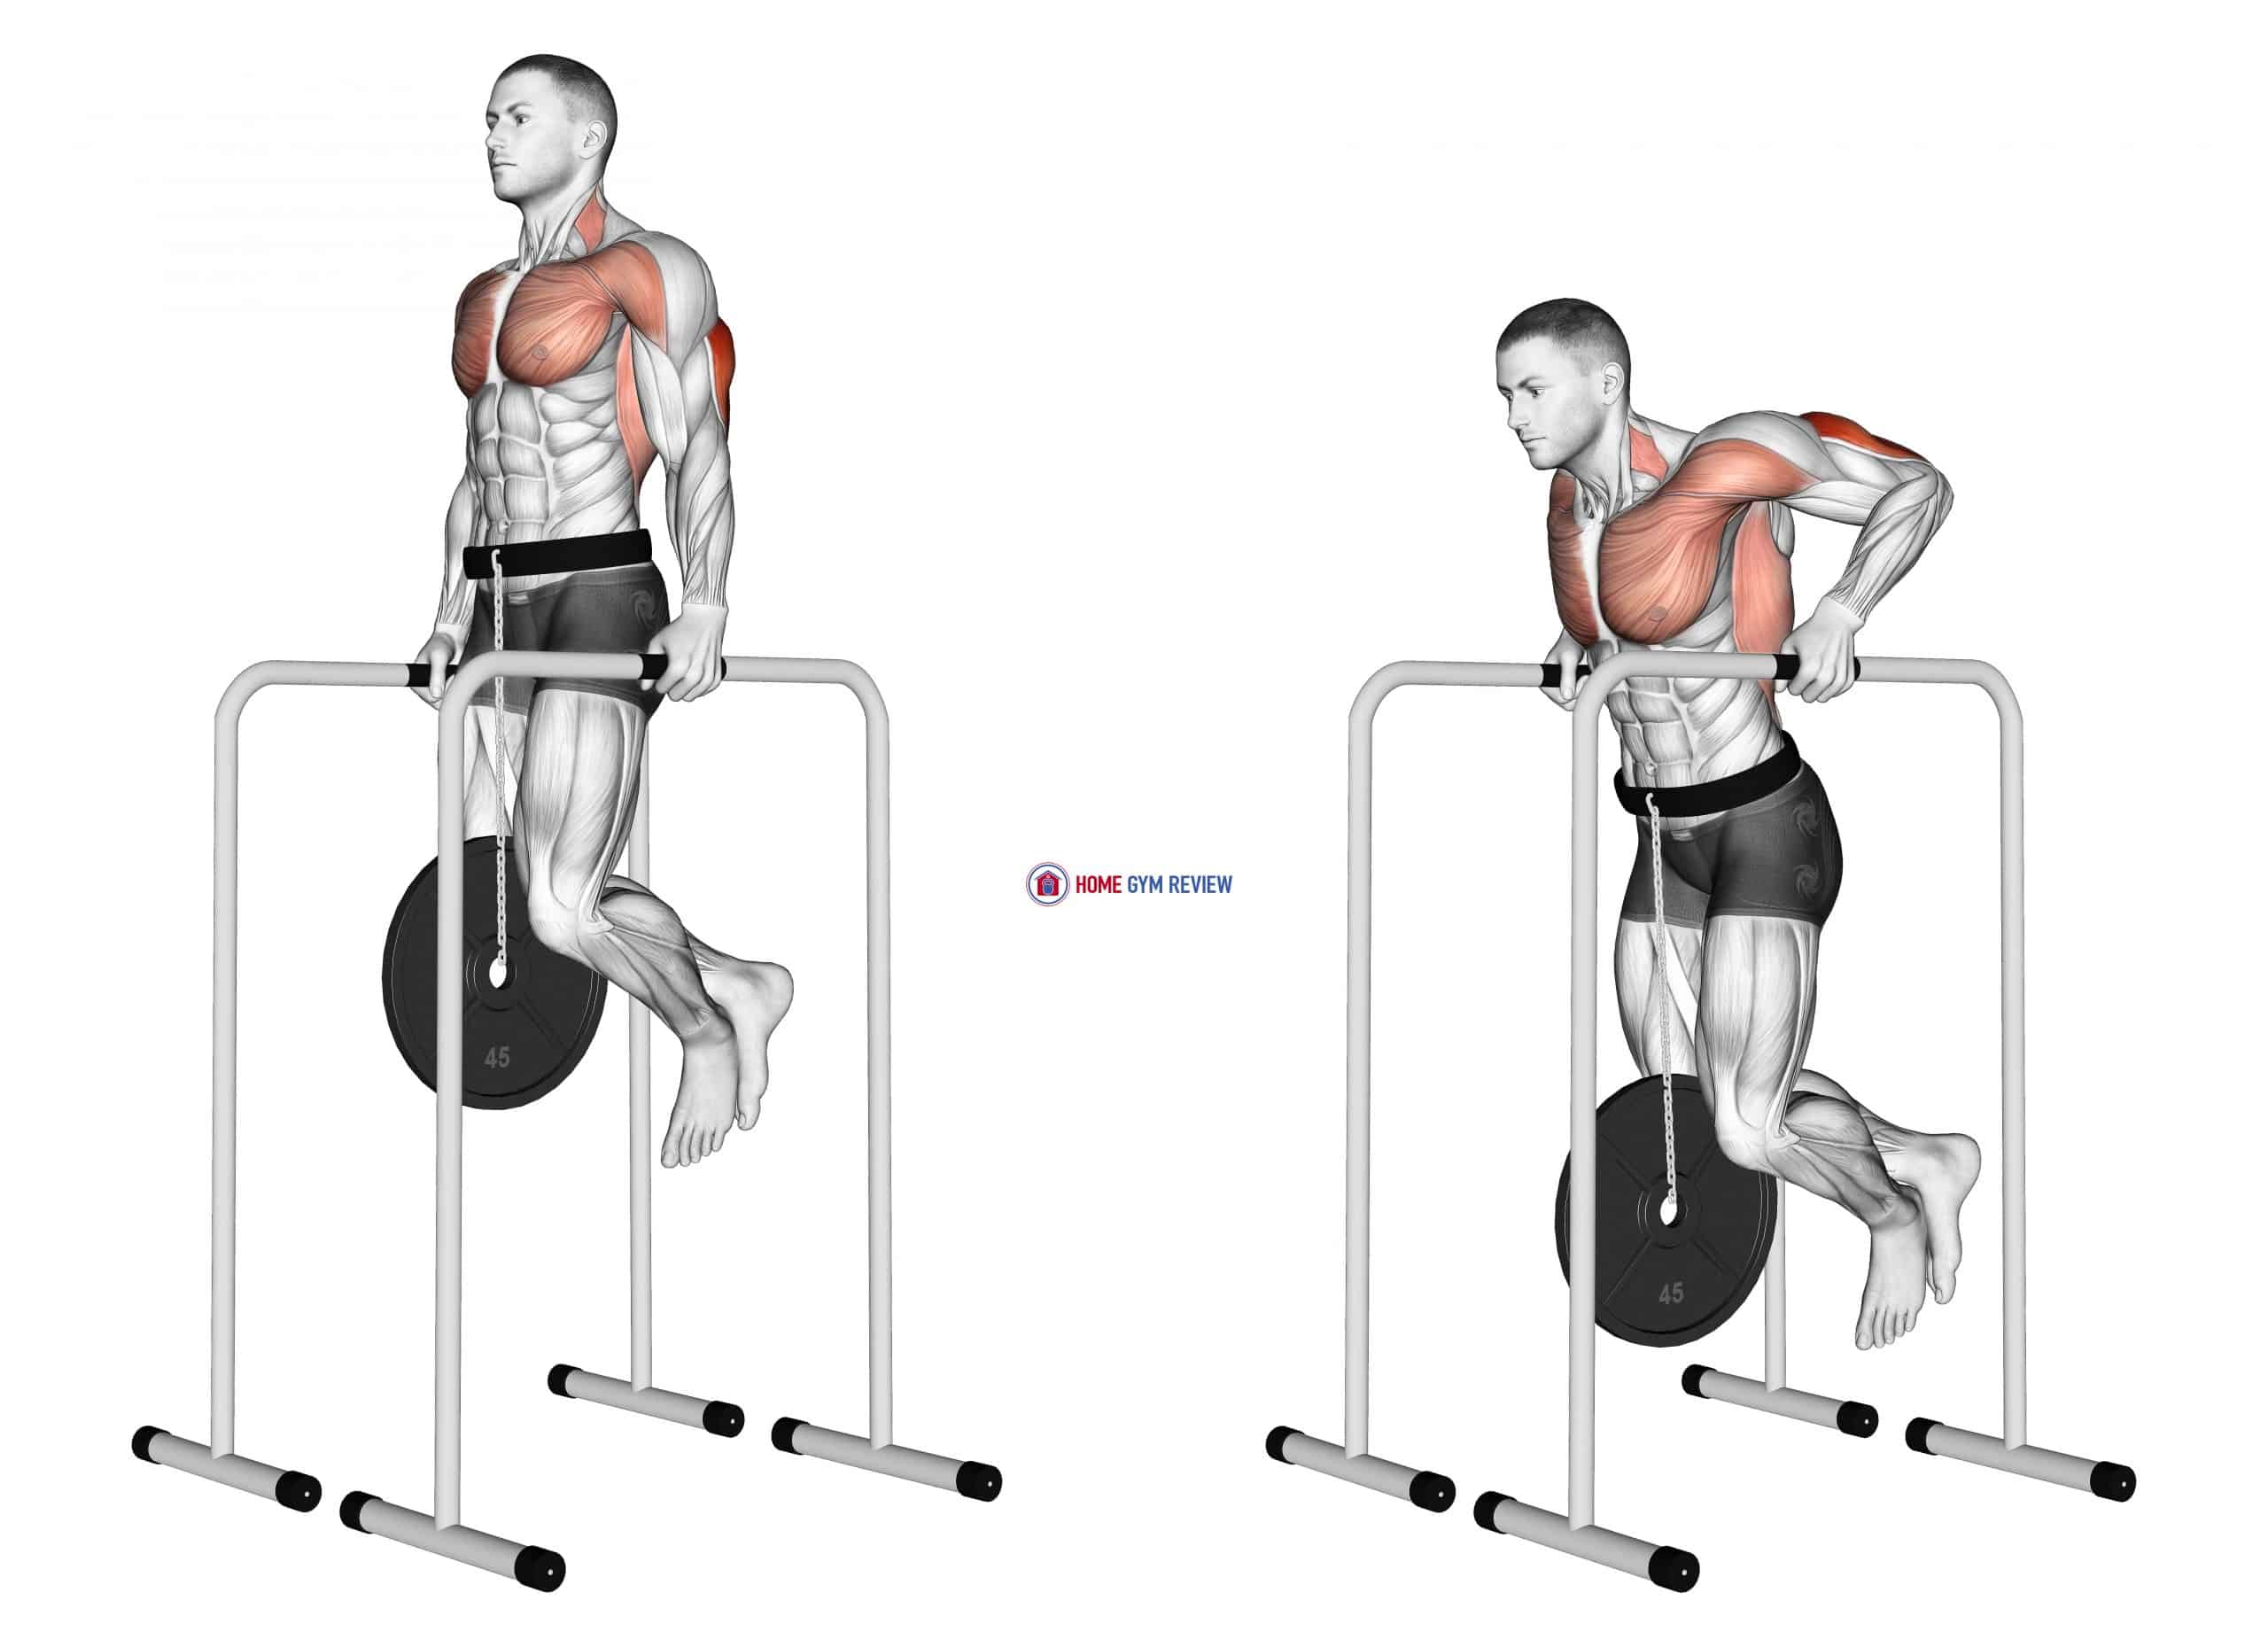 Weighted Triceps Dip on High Parallel Bars